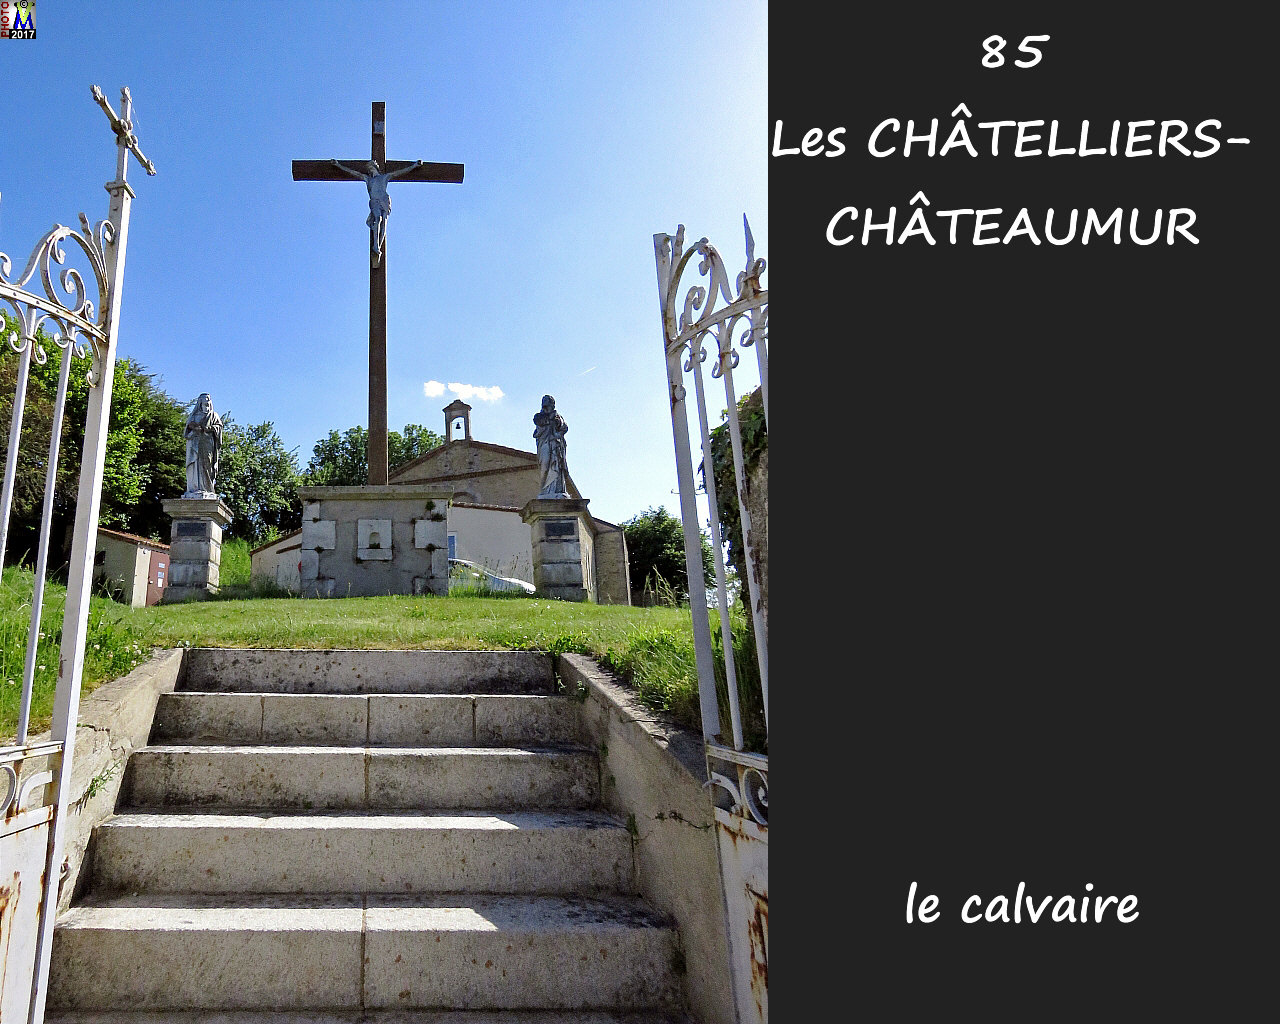 85CHATELLIERS-CHATEAUMUR_calvaire_1000.jpg